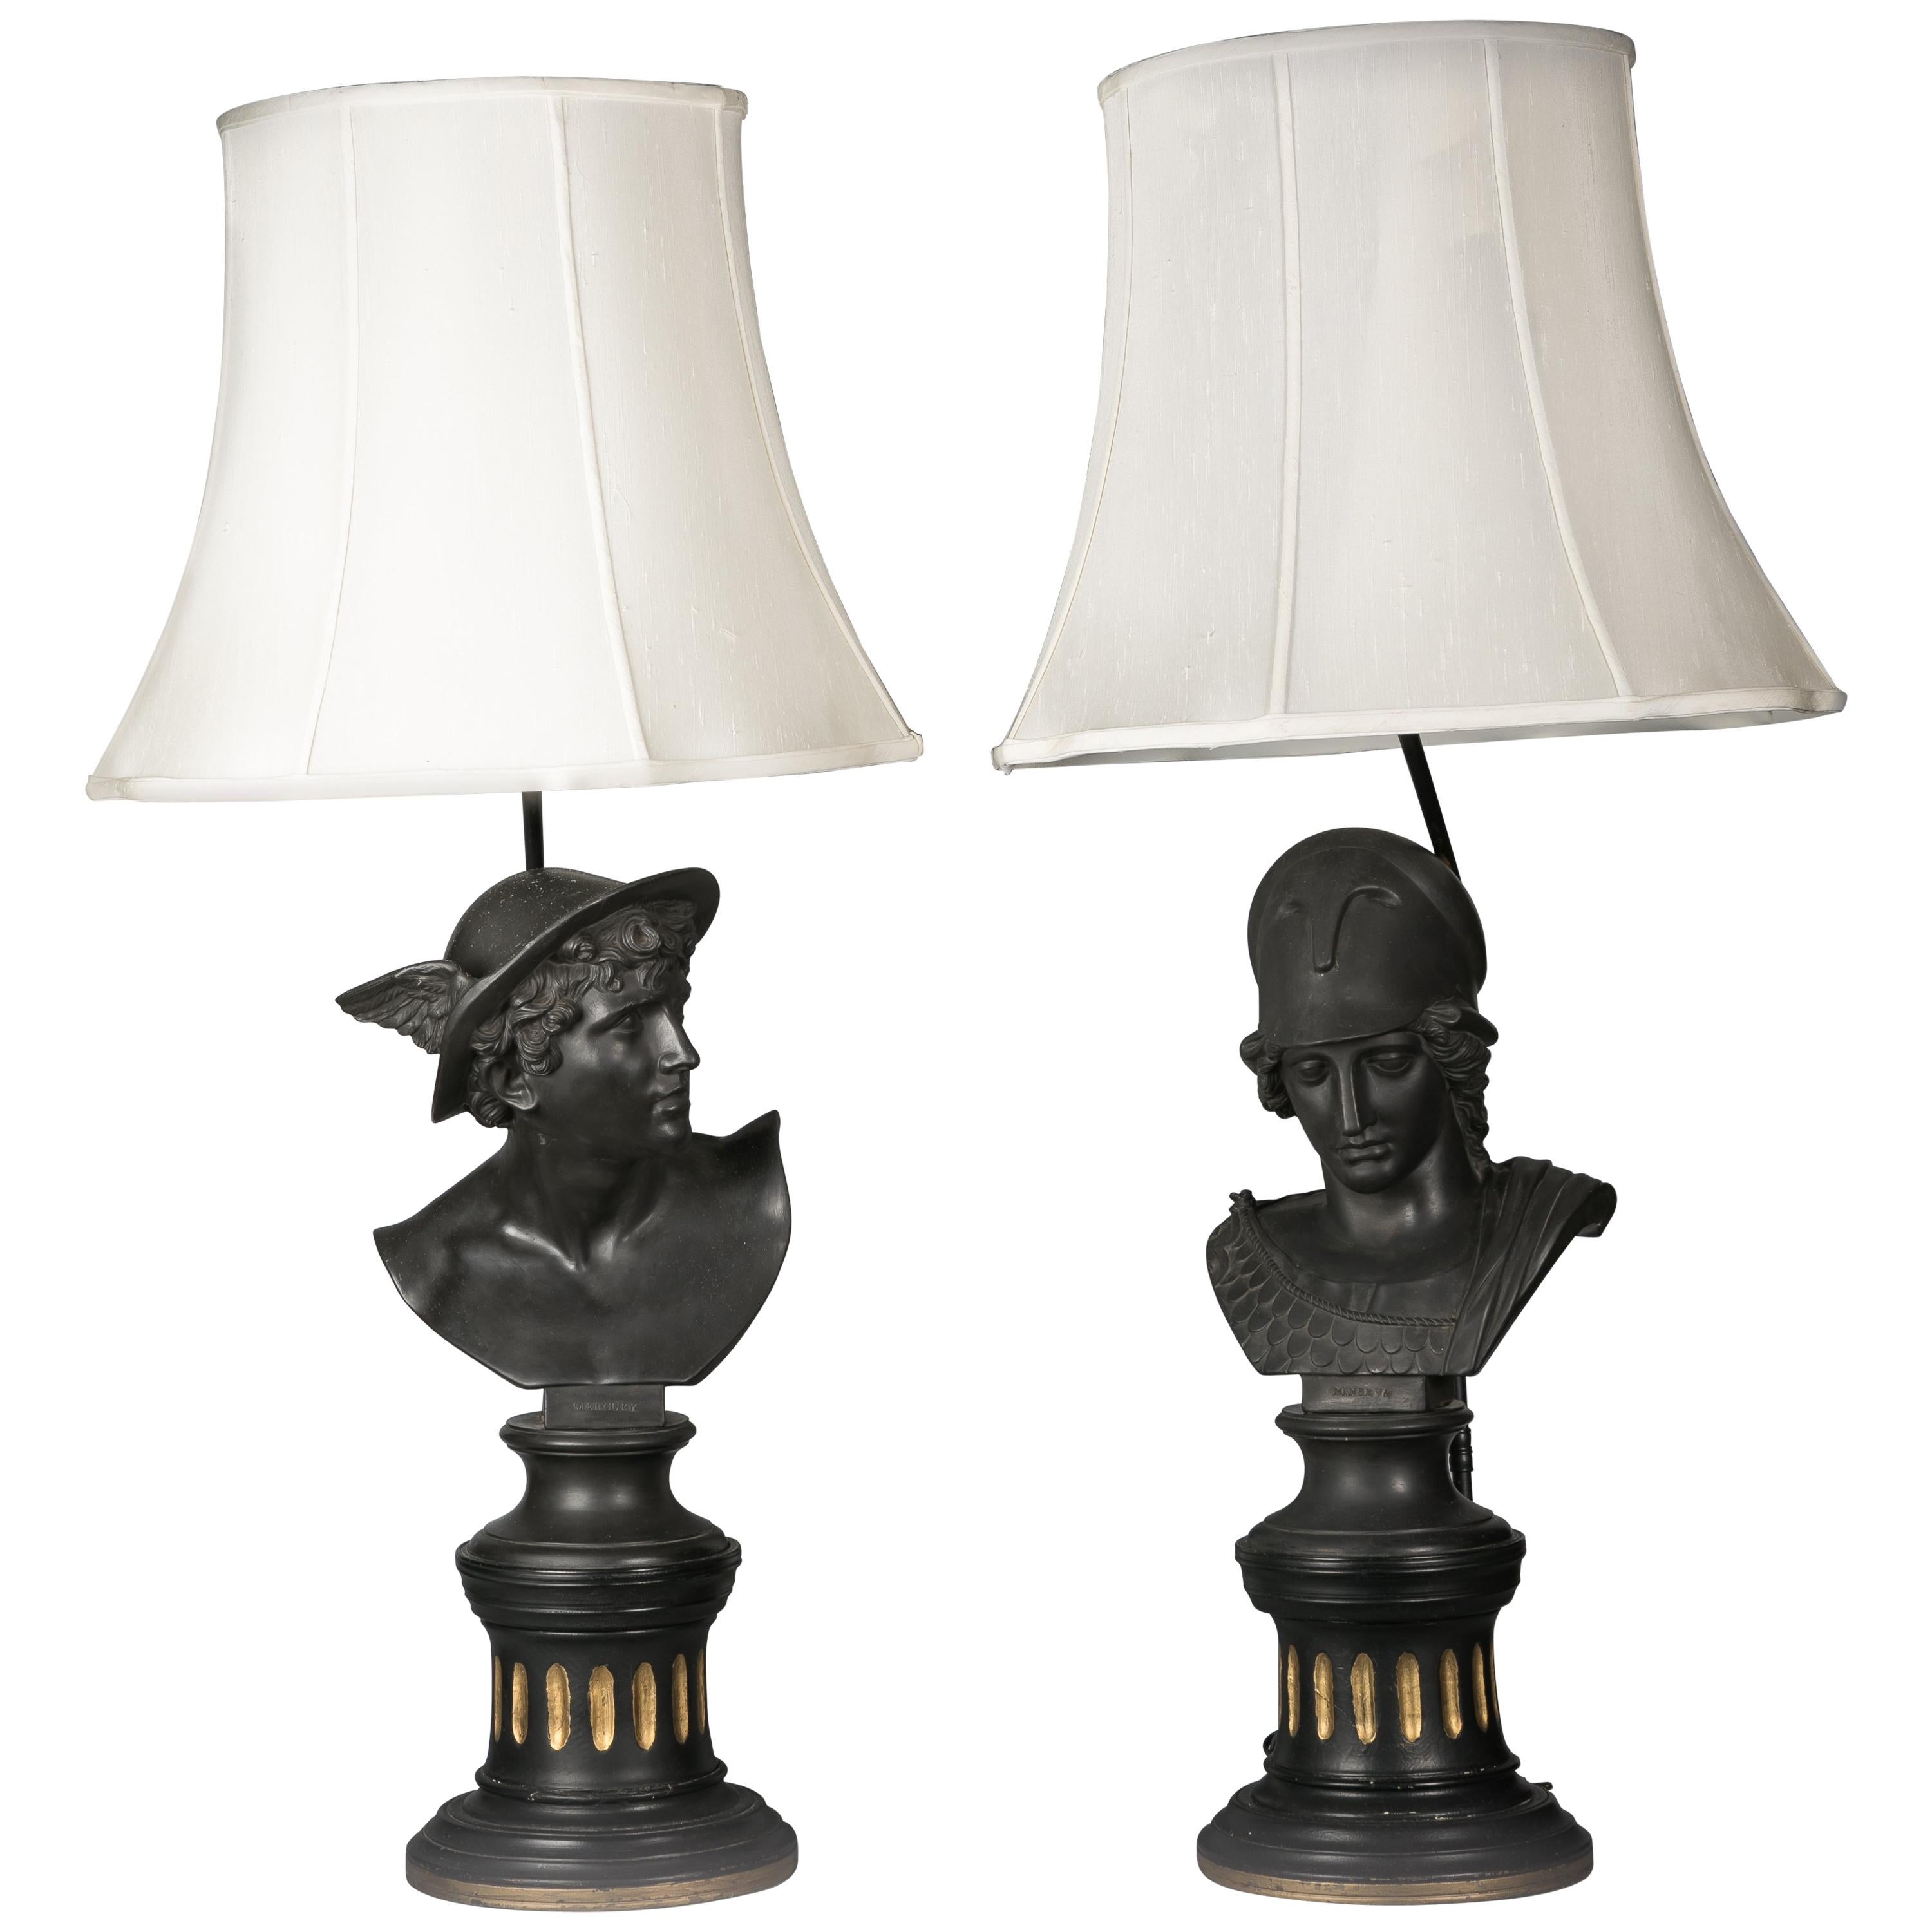 Pair of Wedgwood Basalt Busts Mounted as Lamps, 19th Century For Sale